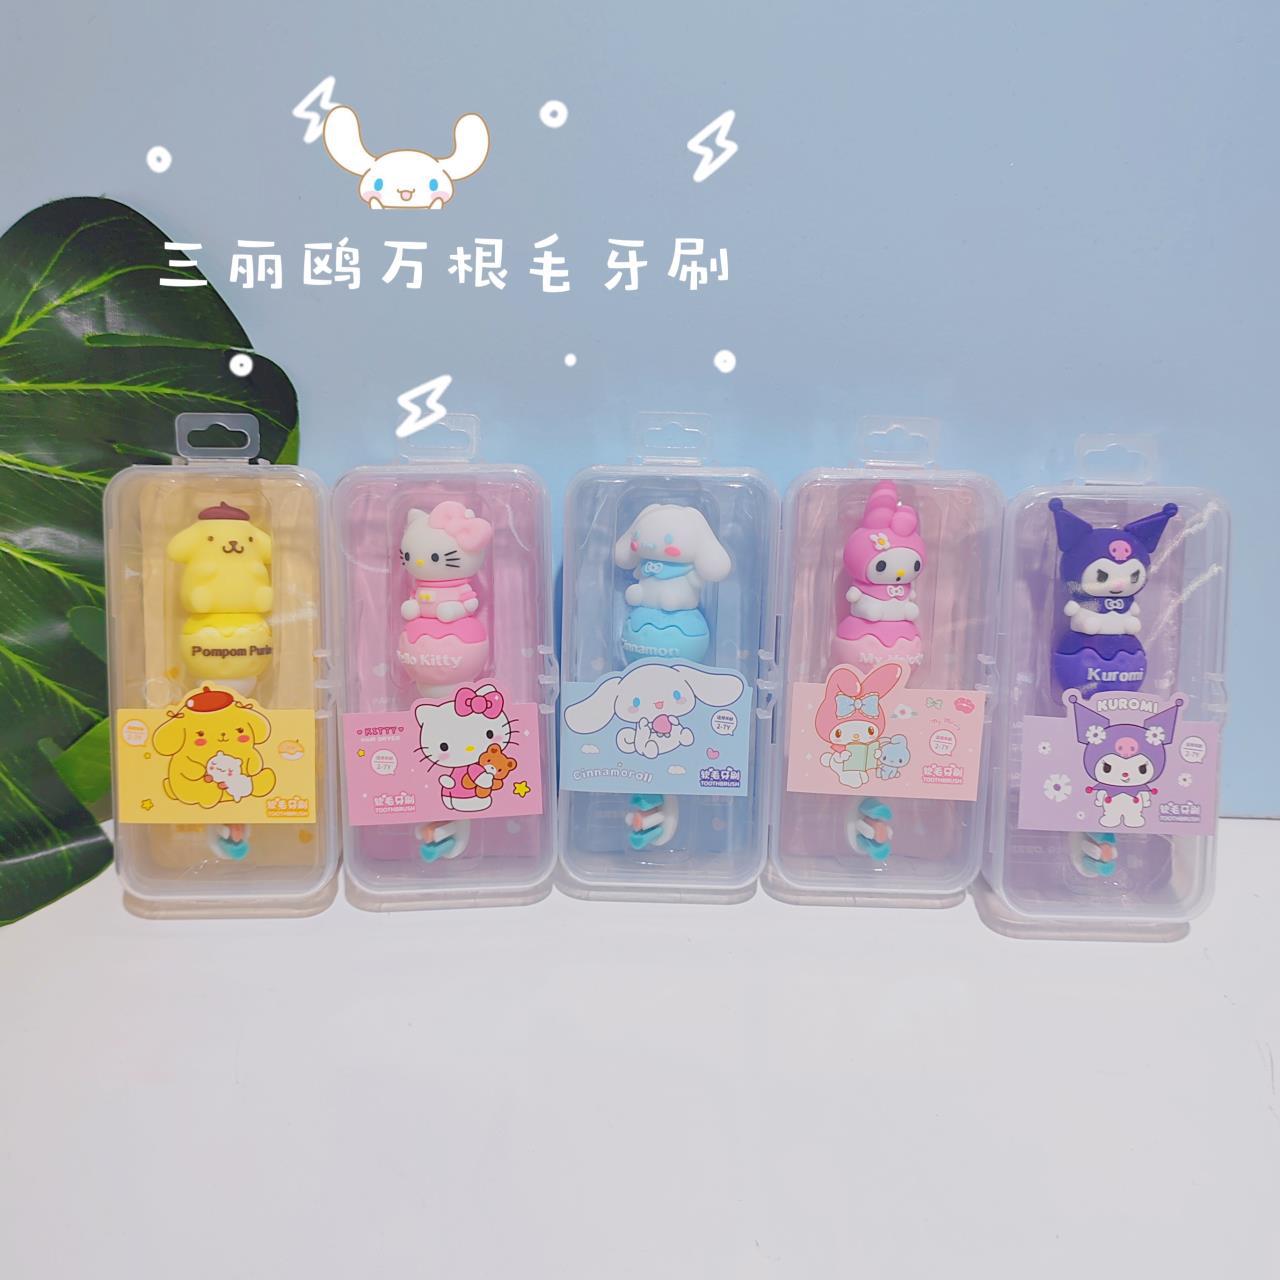 New Children's Toothbrush Wholesale Sanrio Infant Toddler 2-7 Years Old Toothbrush Ten Thousand Soft Hair Care Gum Toothbrush